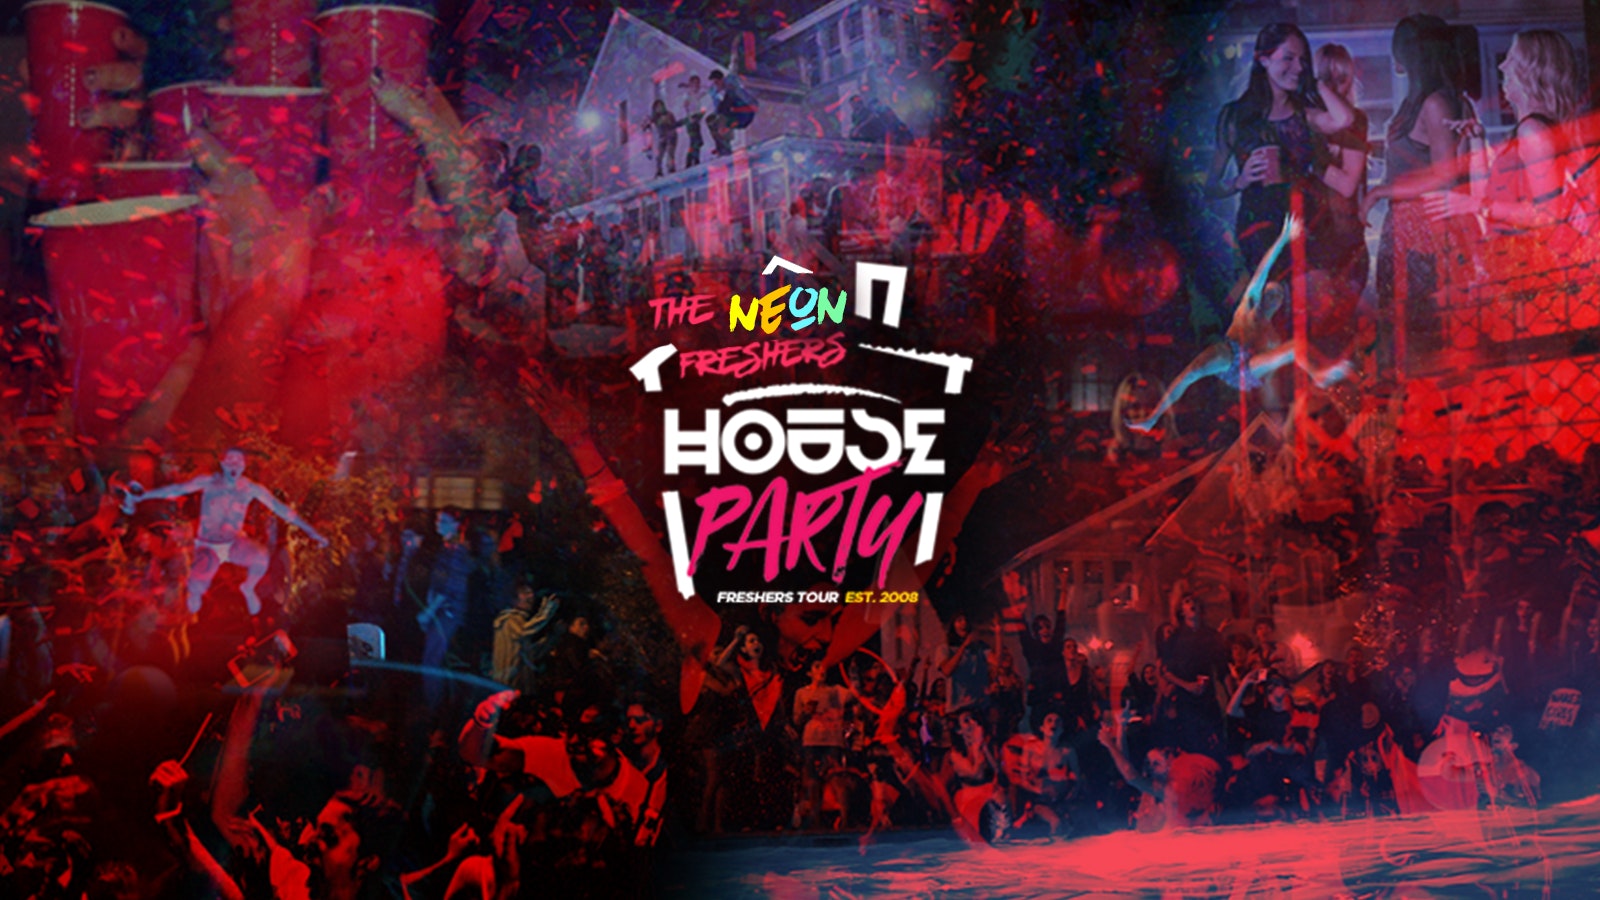 Neon Freshers House Party // Exeter Freshers 2020